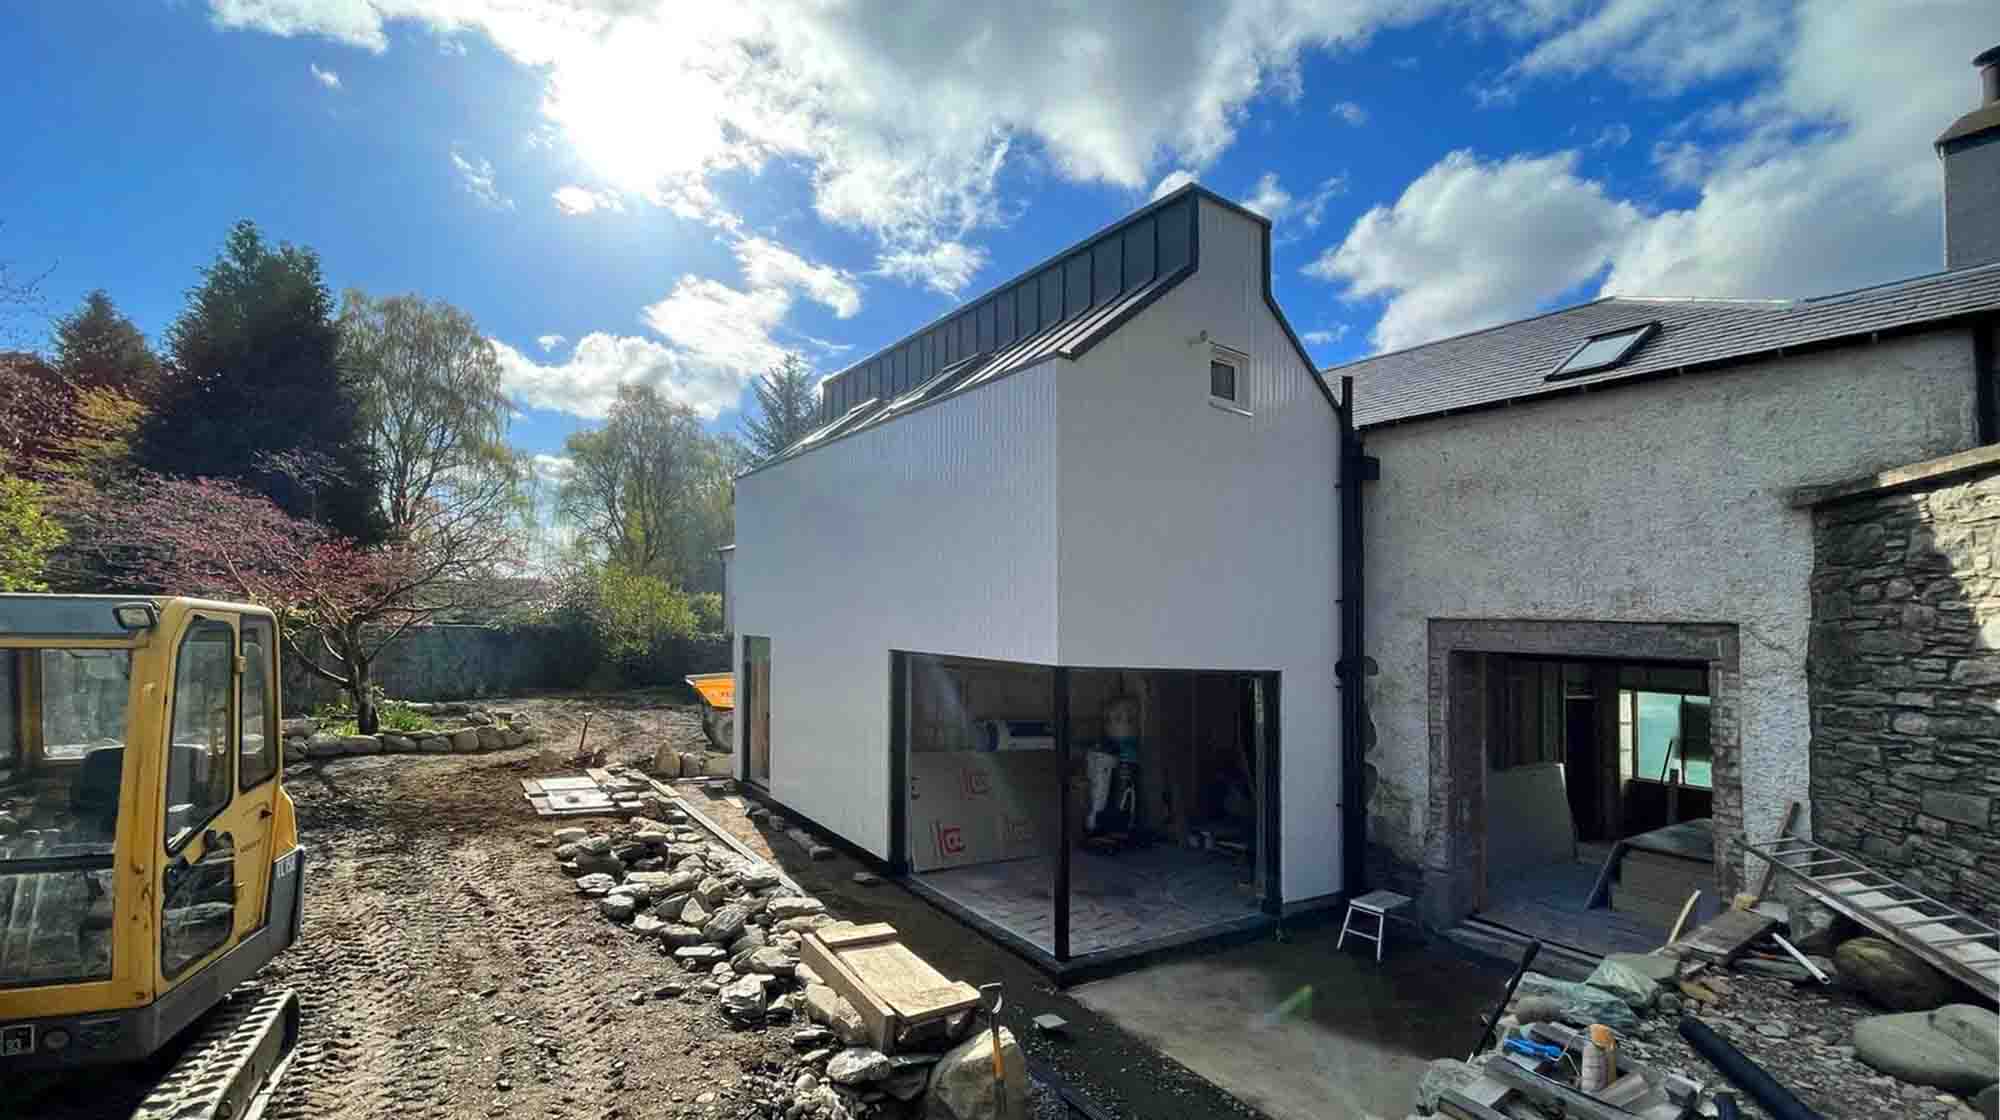 Tap architects, edinburgh architects, scottish architecture, pertshire, house extension, timber cladding, rural architecture